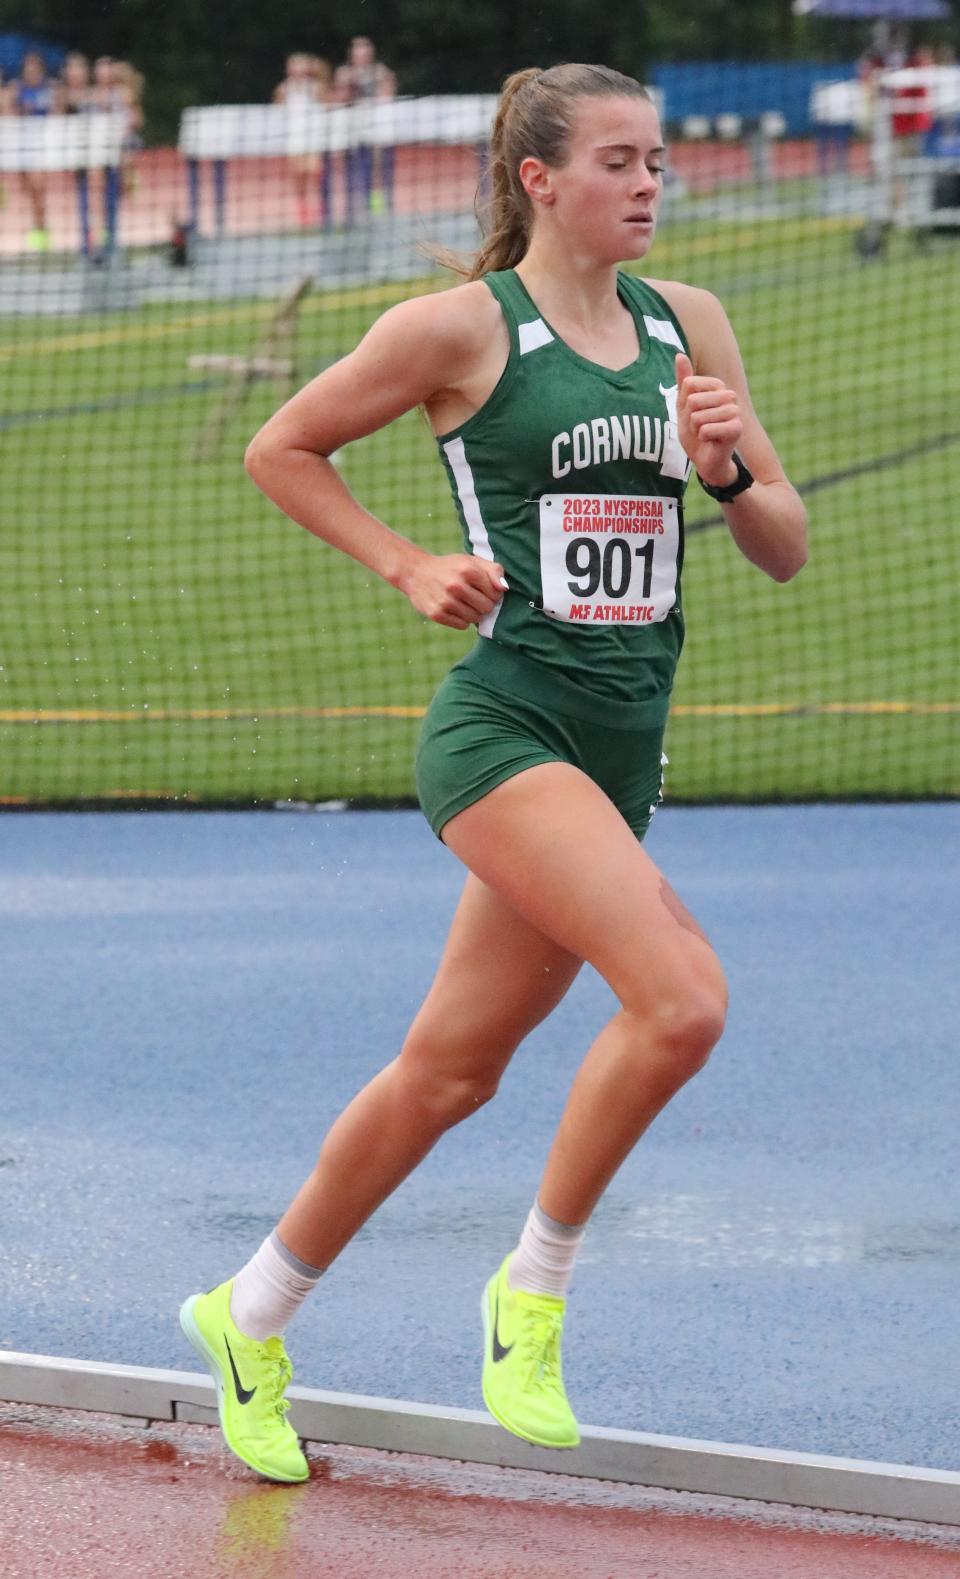 Karrie Baloga from Cornwall competes  in the girls 3000 meter run during the New York State Track and Field Championships at Middletown High School, June 9, 2023.